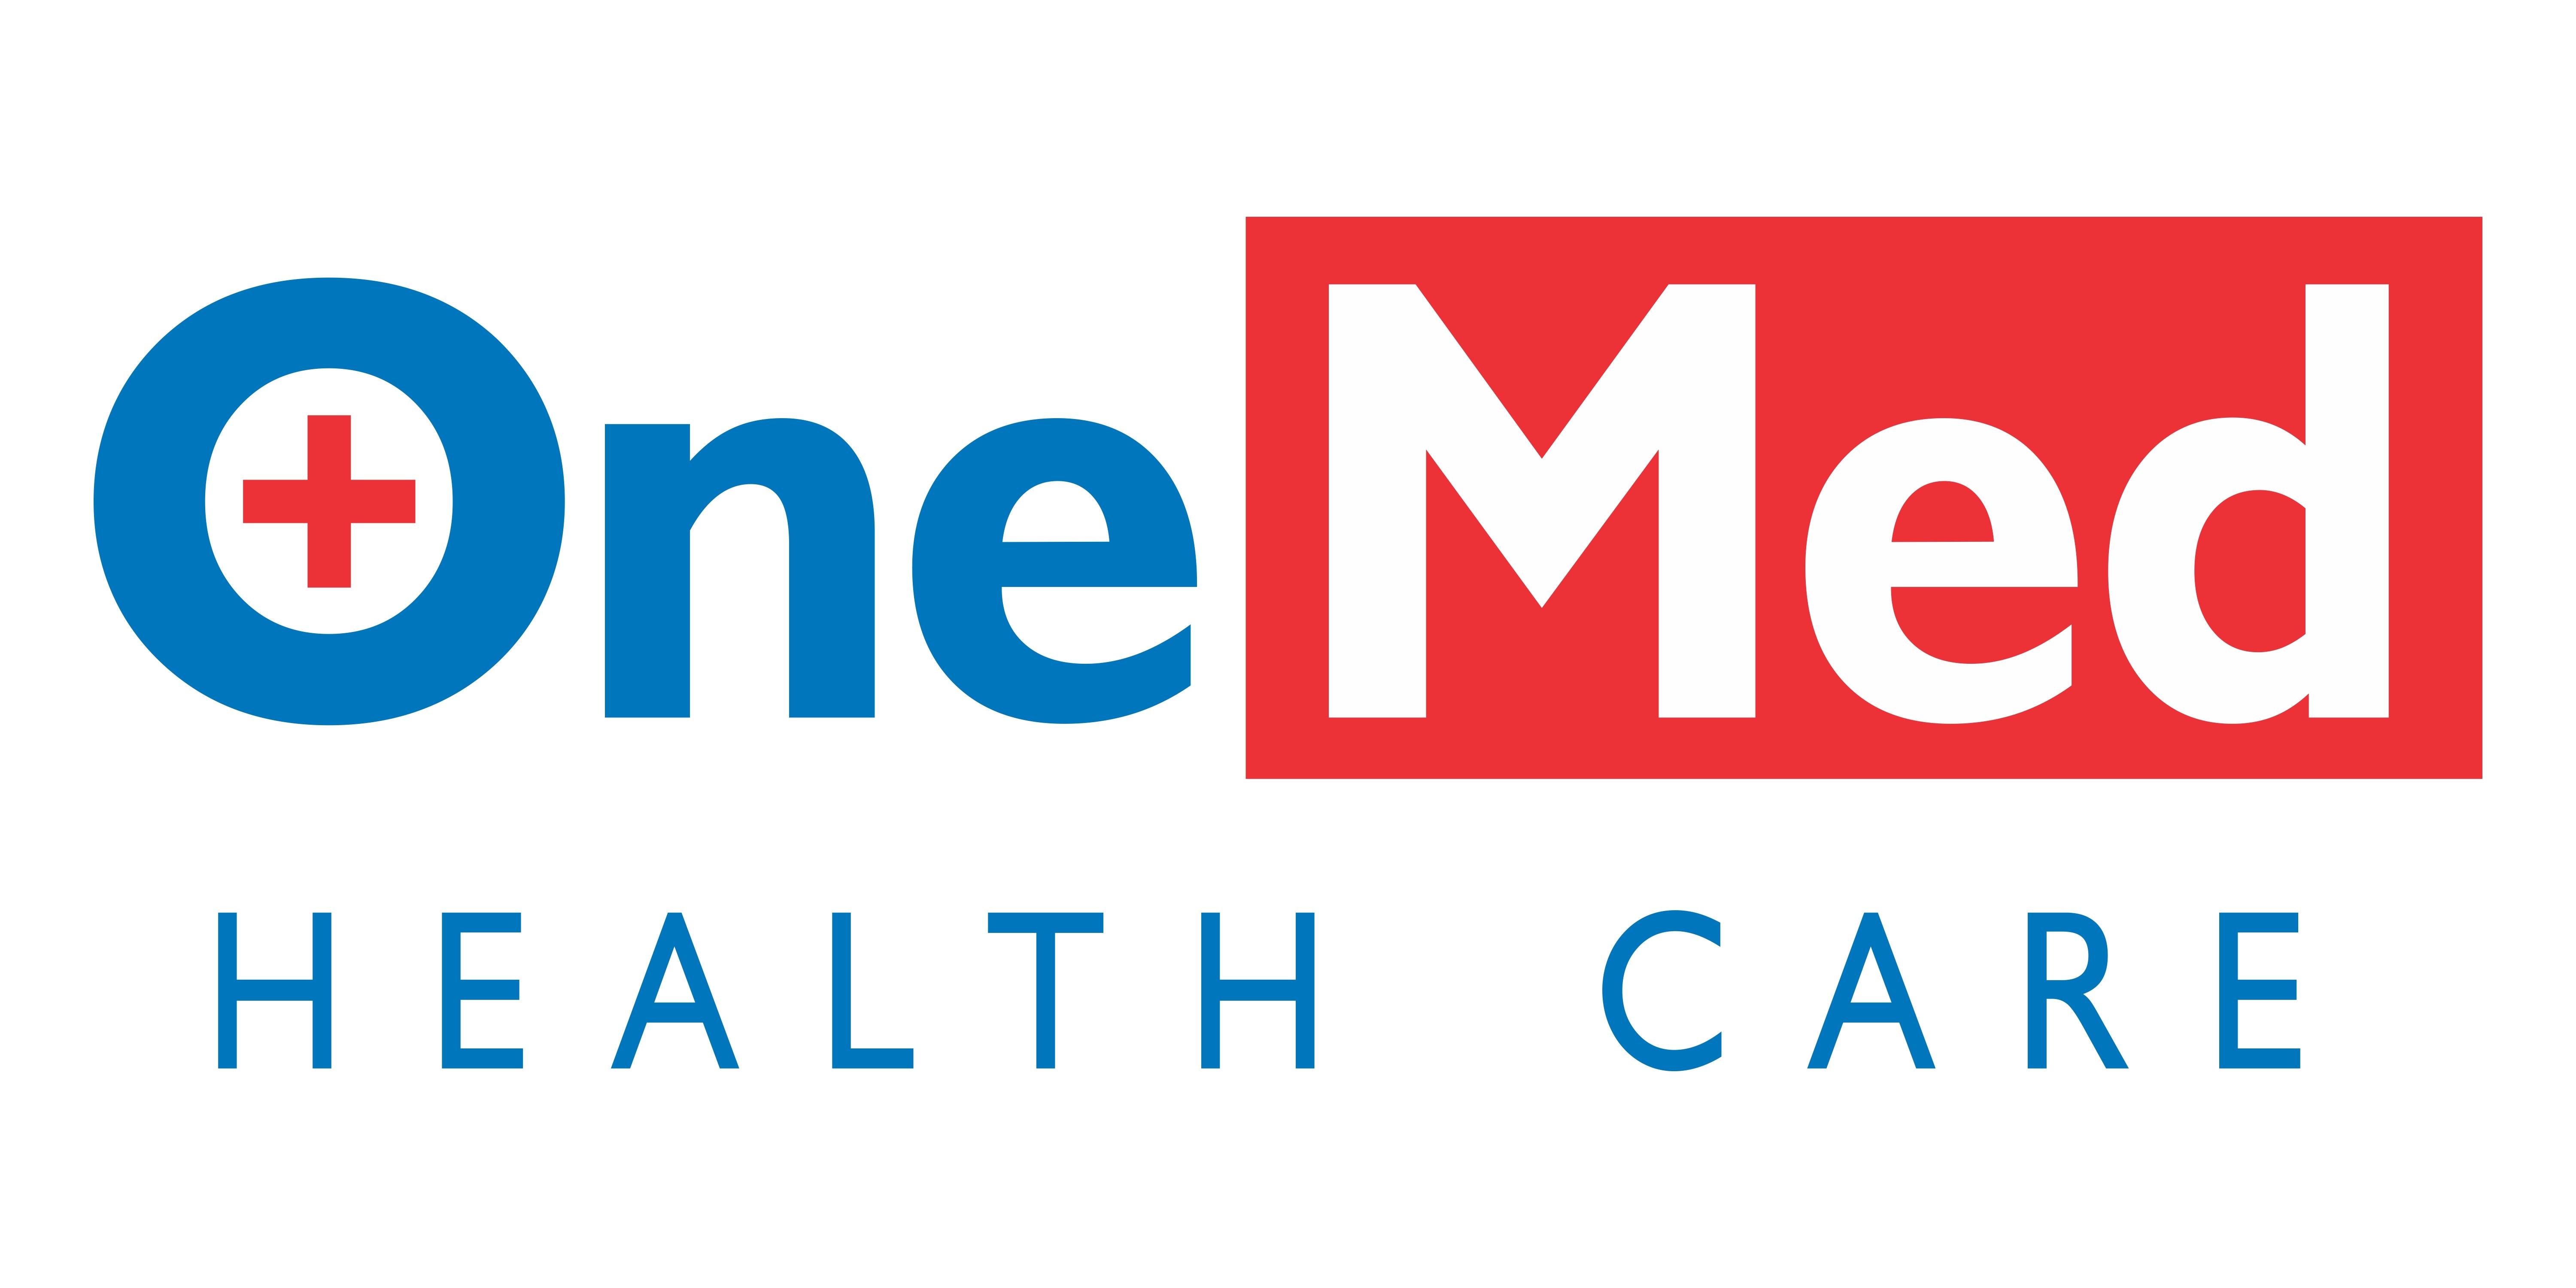 OneMed Health Care